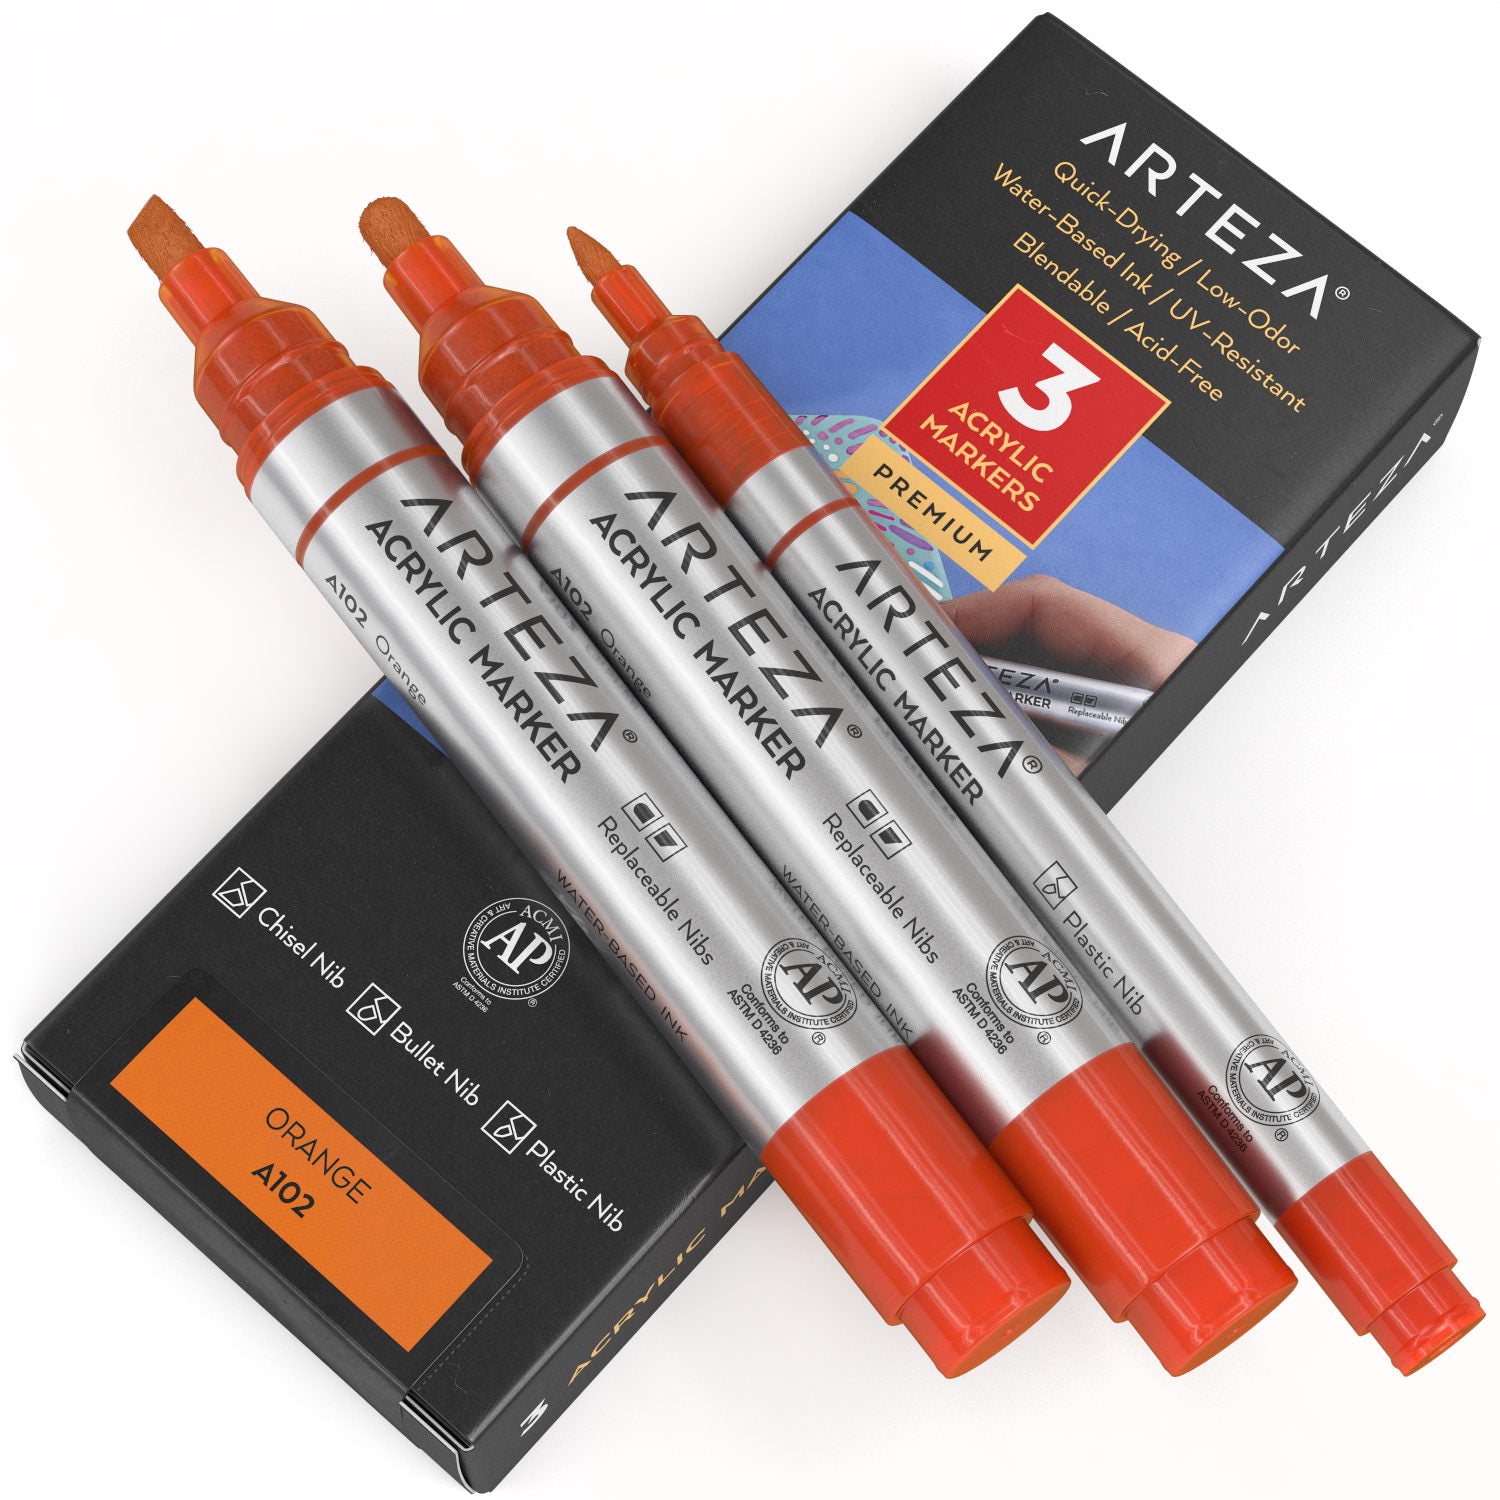 Arteza Acrylic Paint Markers, Set of 40 Acrylic Paint Pens in Assorted  Colors, Art & Craft Supplies for Glass, Pottery, Ceramic, Rock, Canvas  Painting